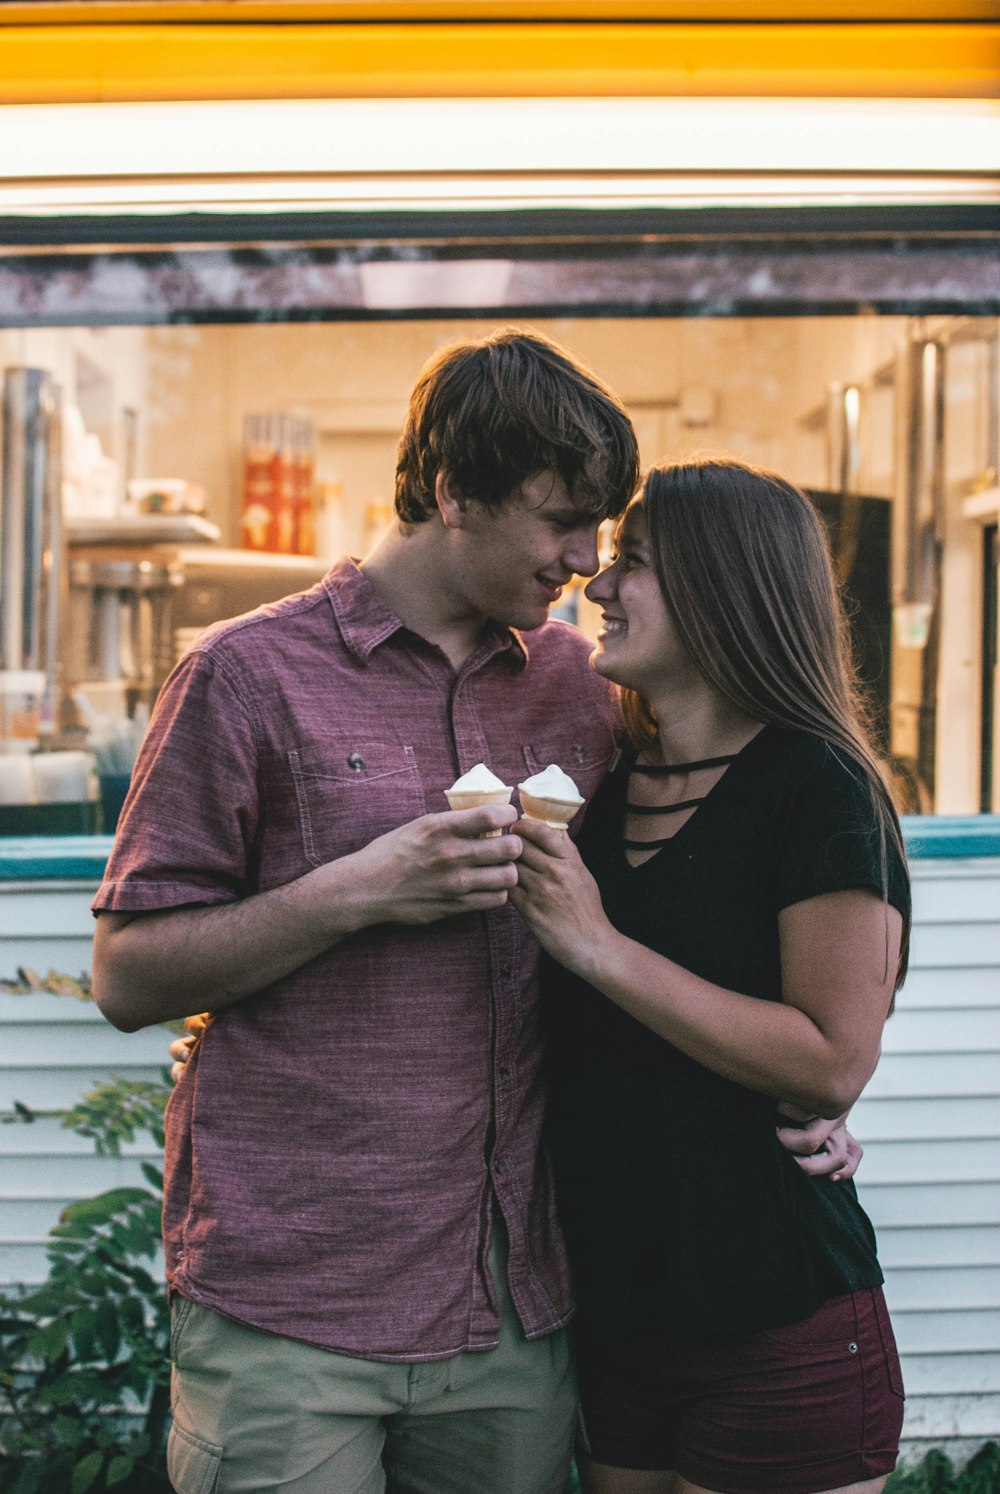 man hugging woman while holding ice cream